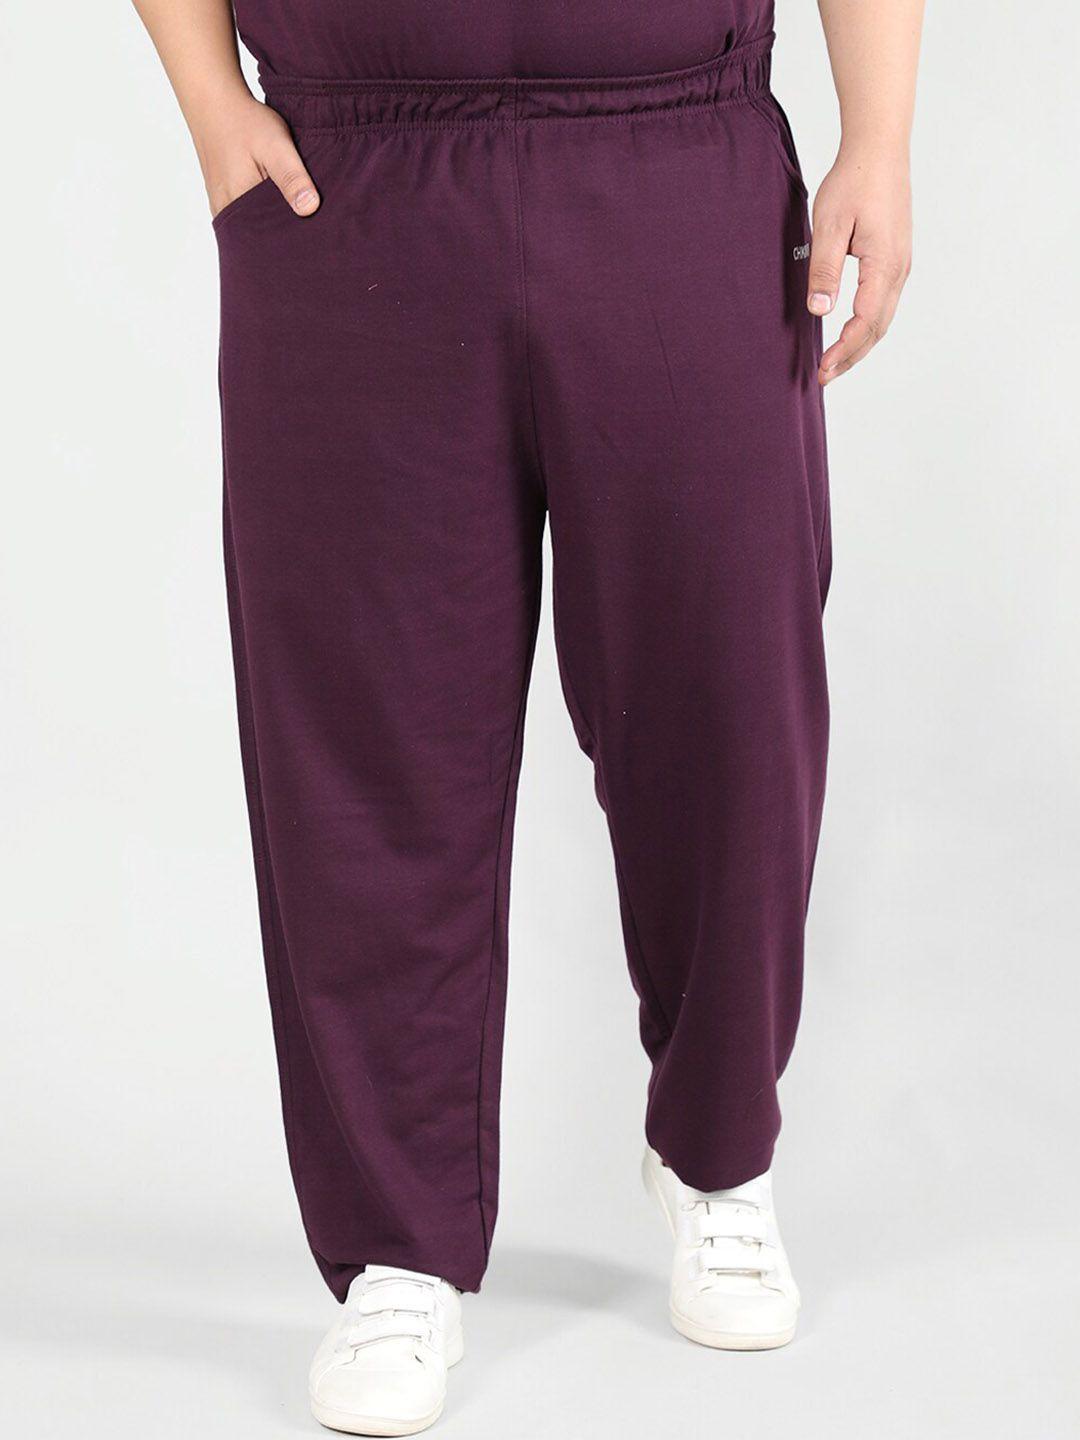 chkokko men plus size relaxed-fit track pants